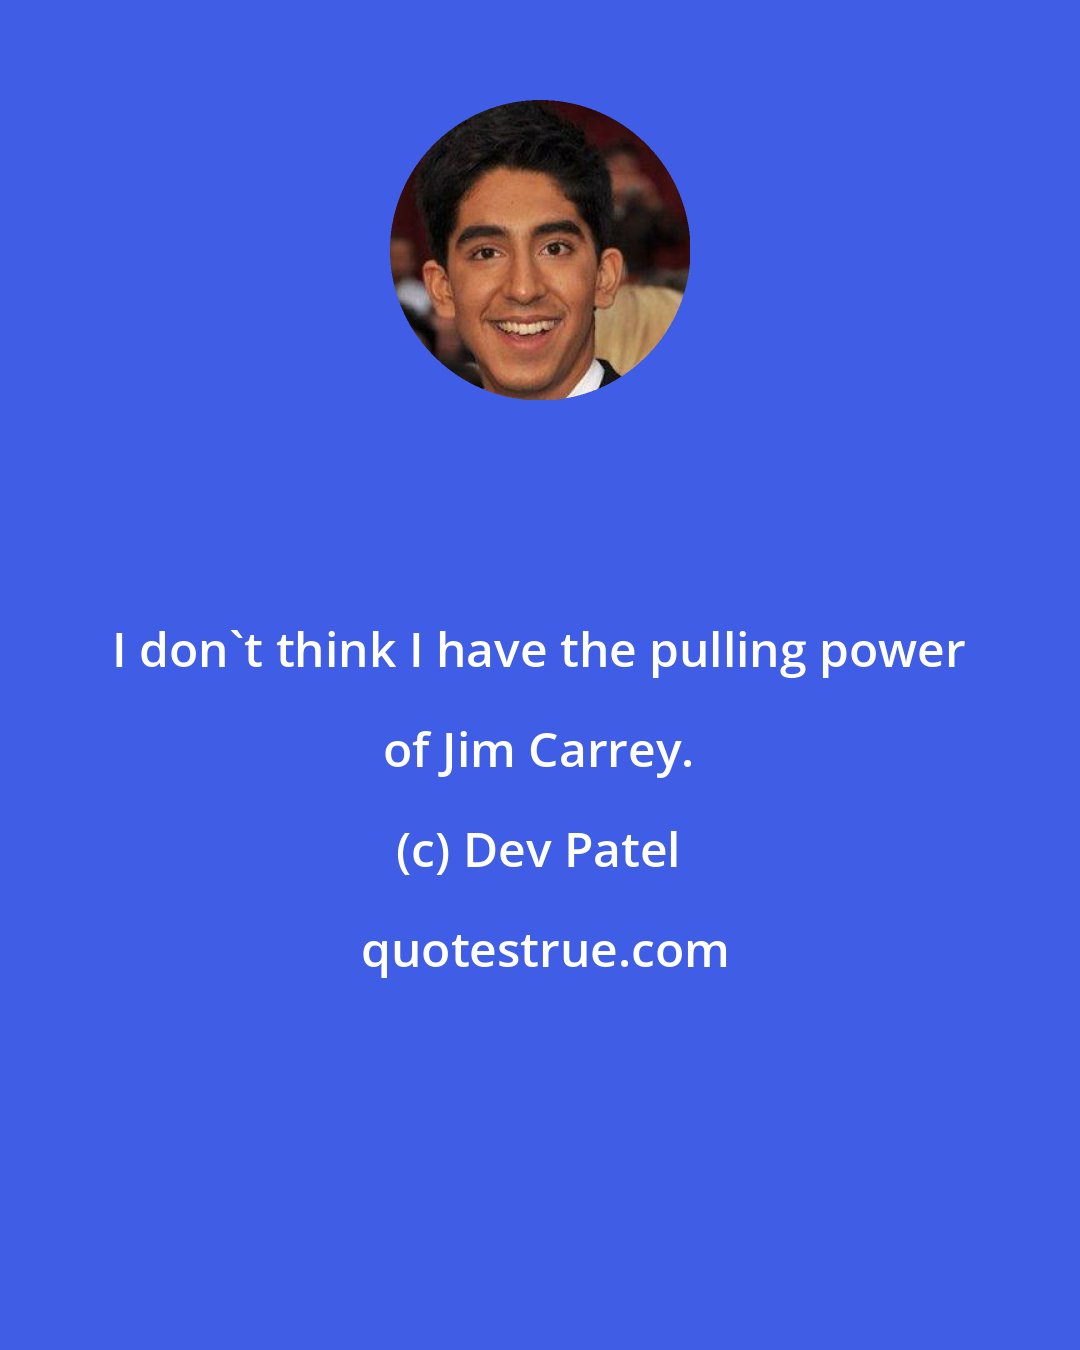 Dev Patel: I don't think I have the pulling power of Jim Carrey.